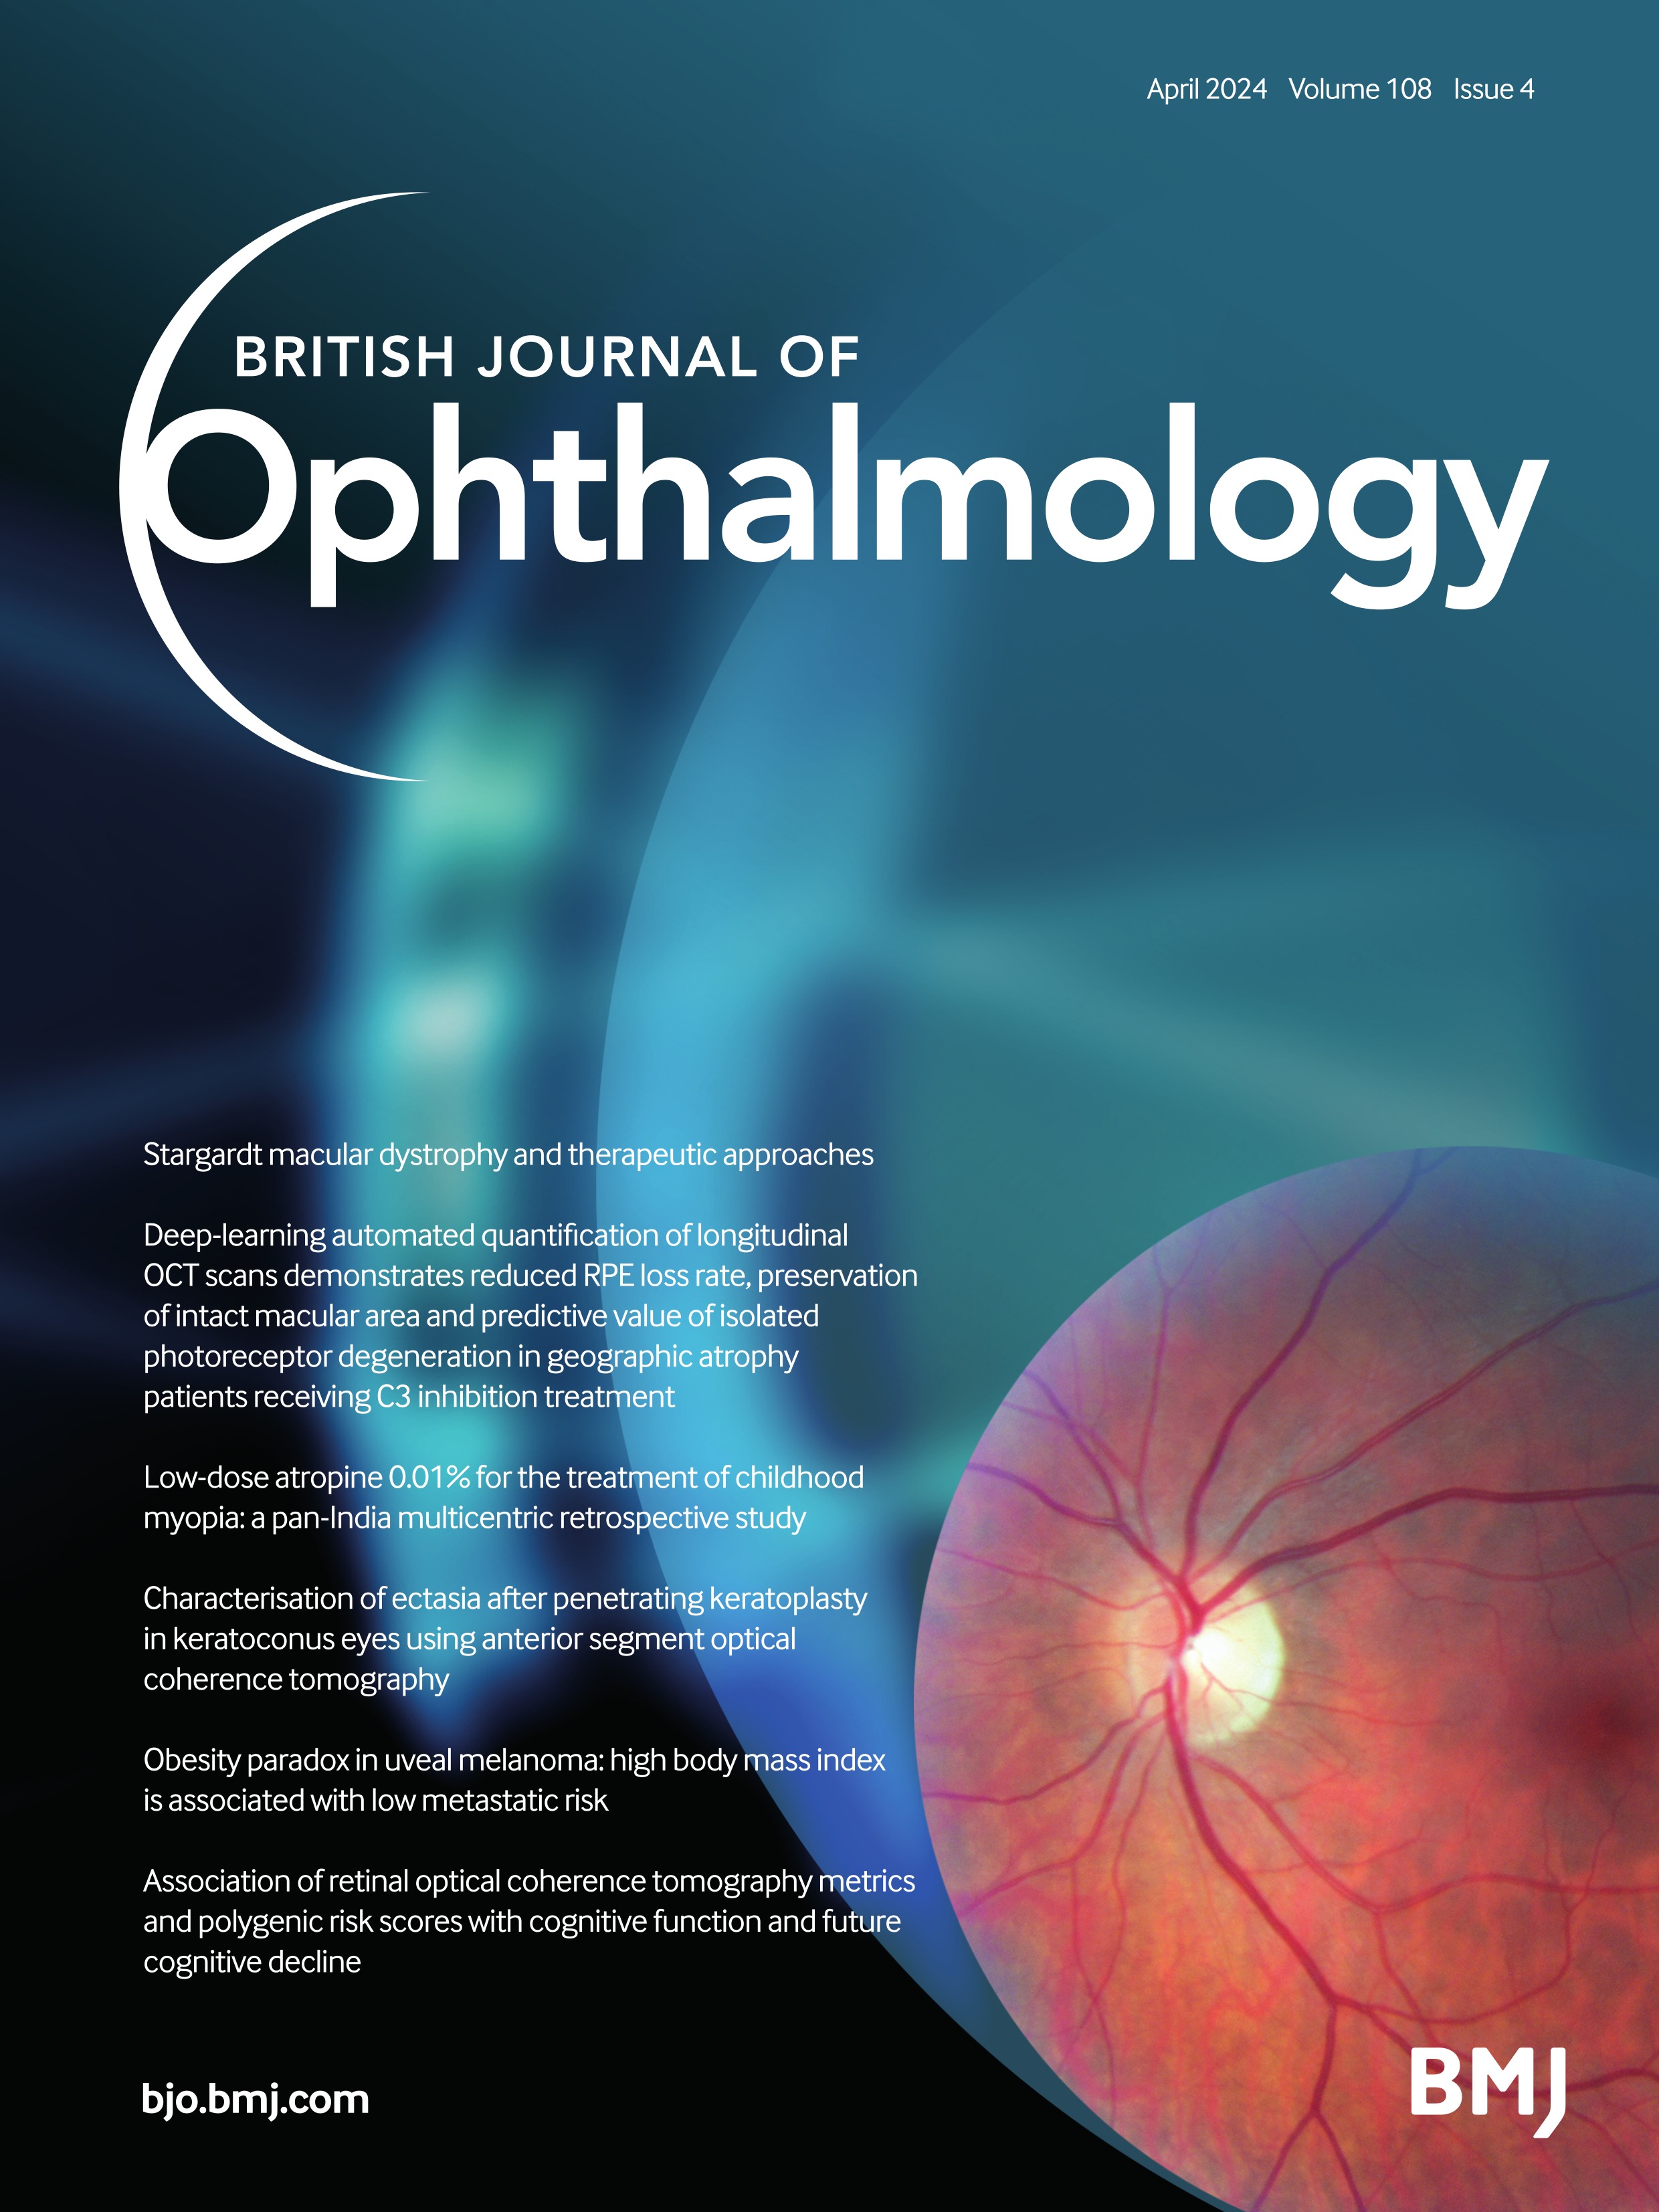 Intraocular medulloepithelioma clinical features and management of 11 cases